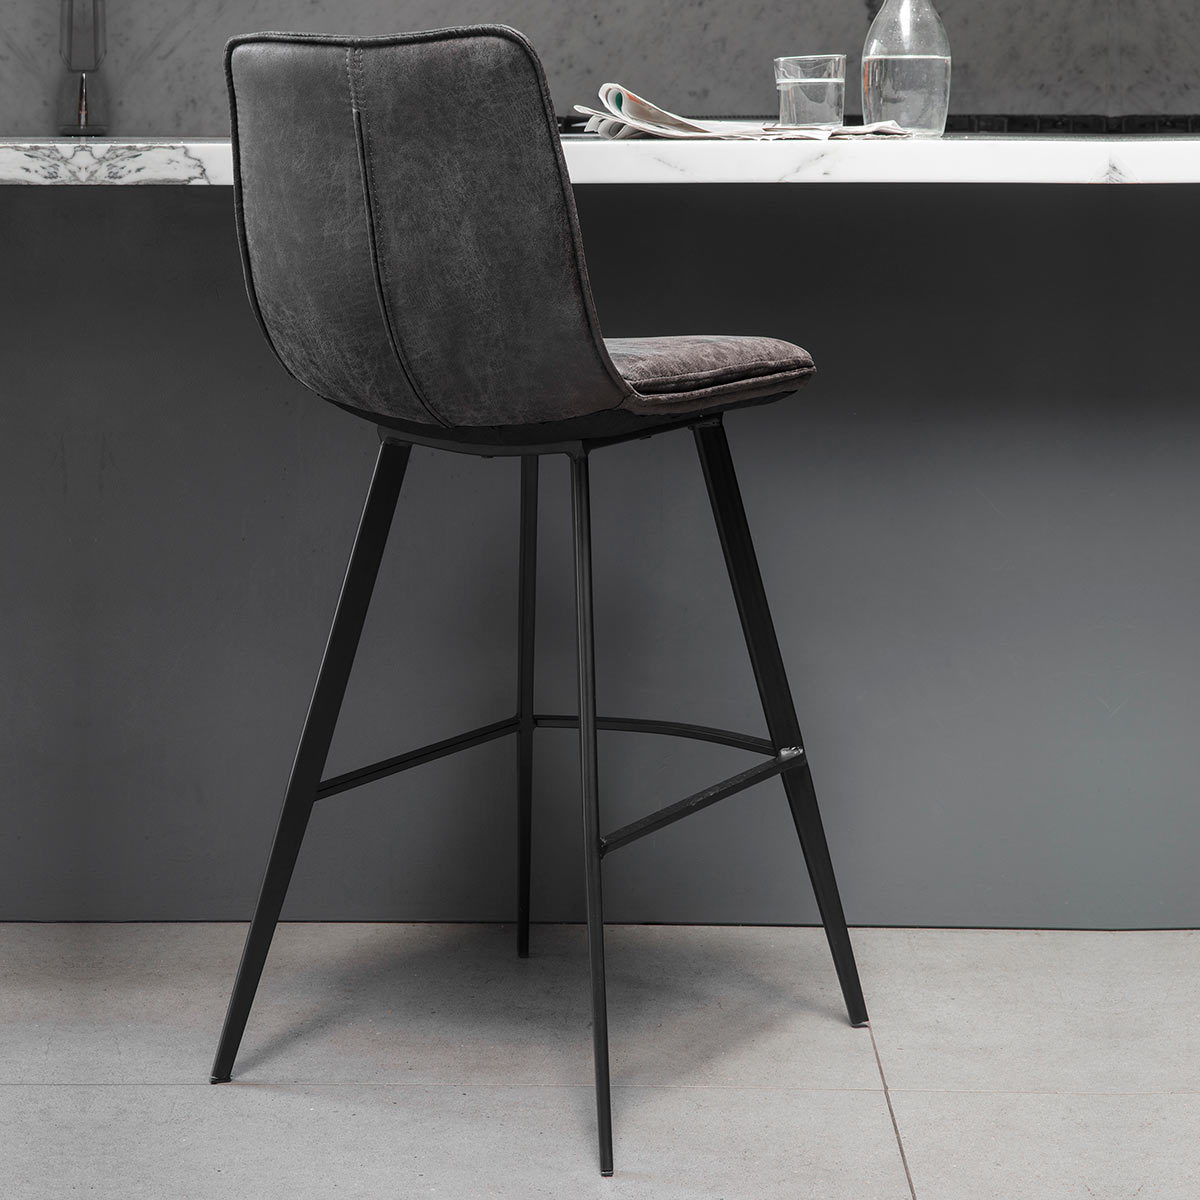 Gallery Palmer Grey Faux Leather Bar Stool, 2 Pack